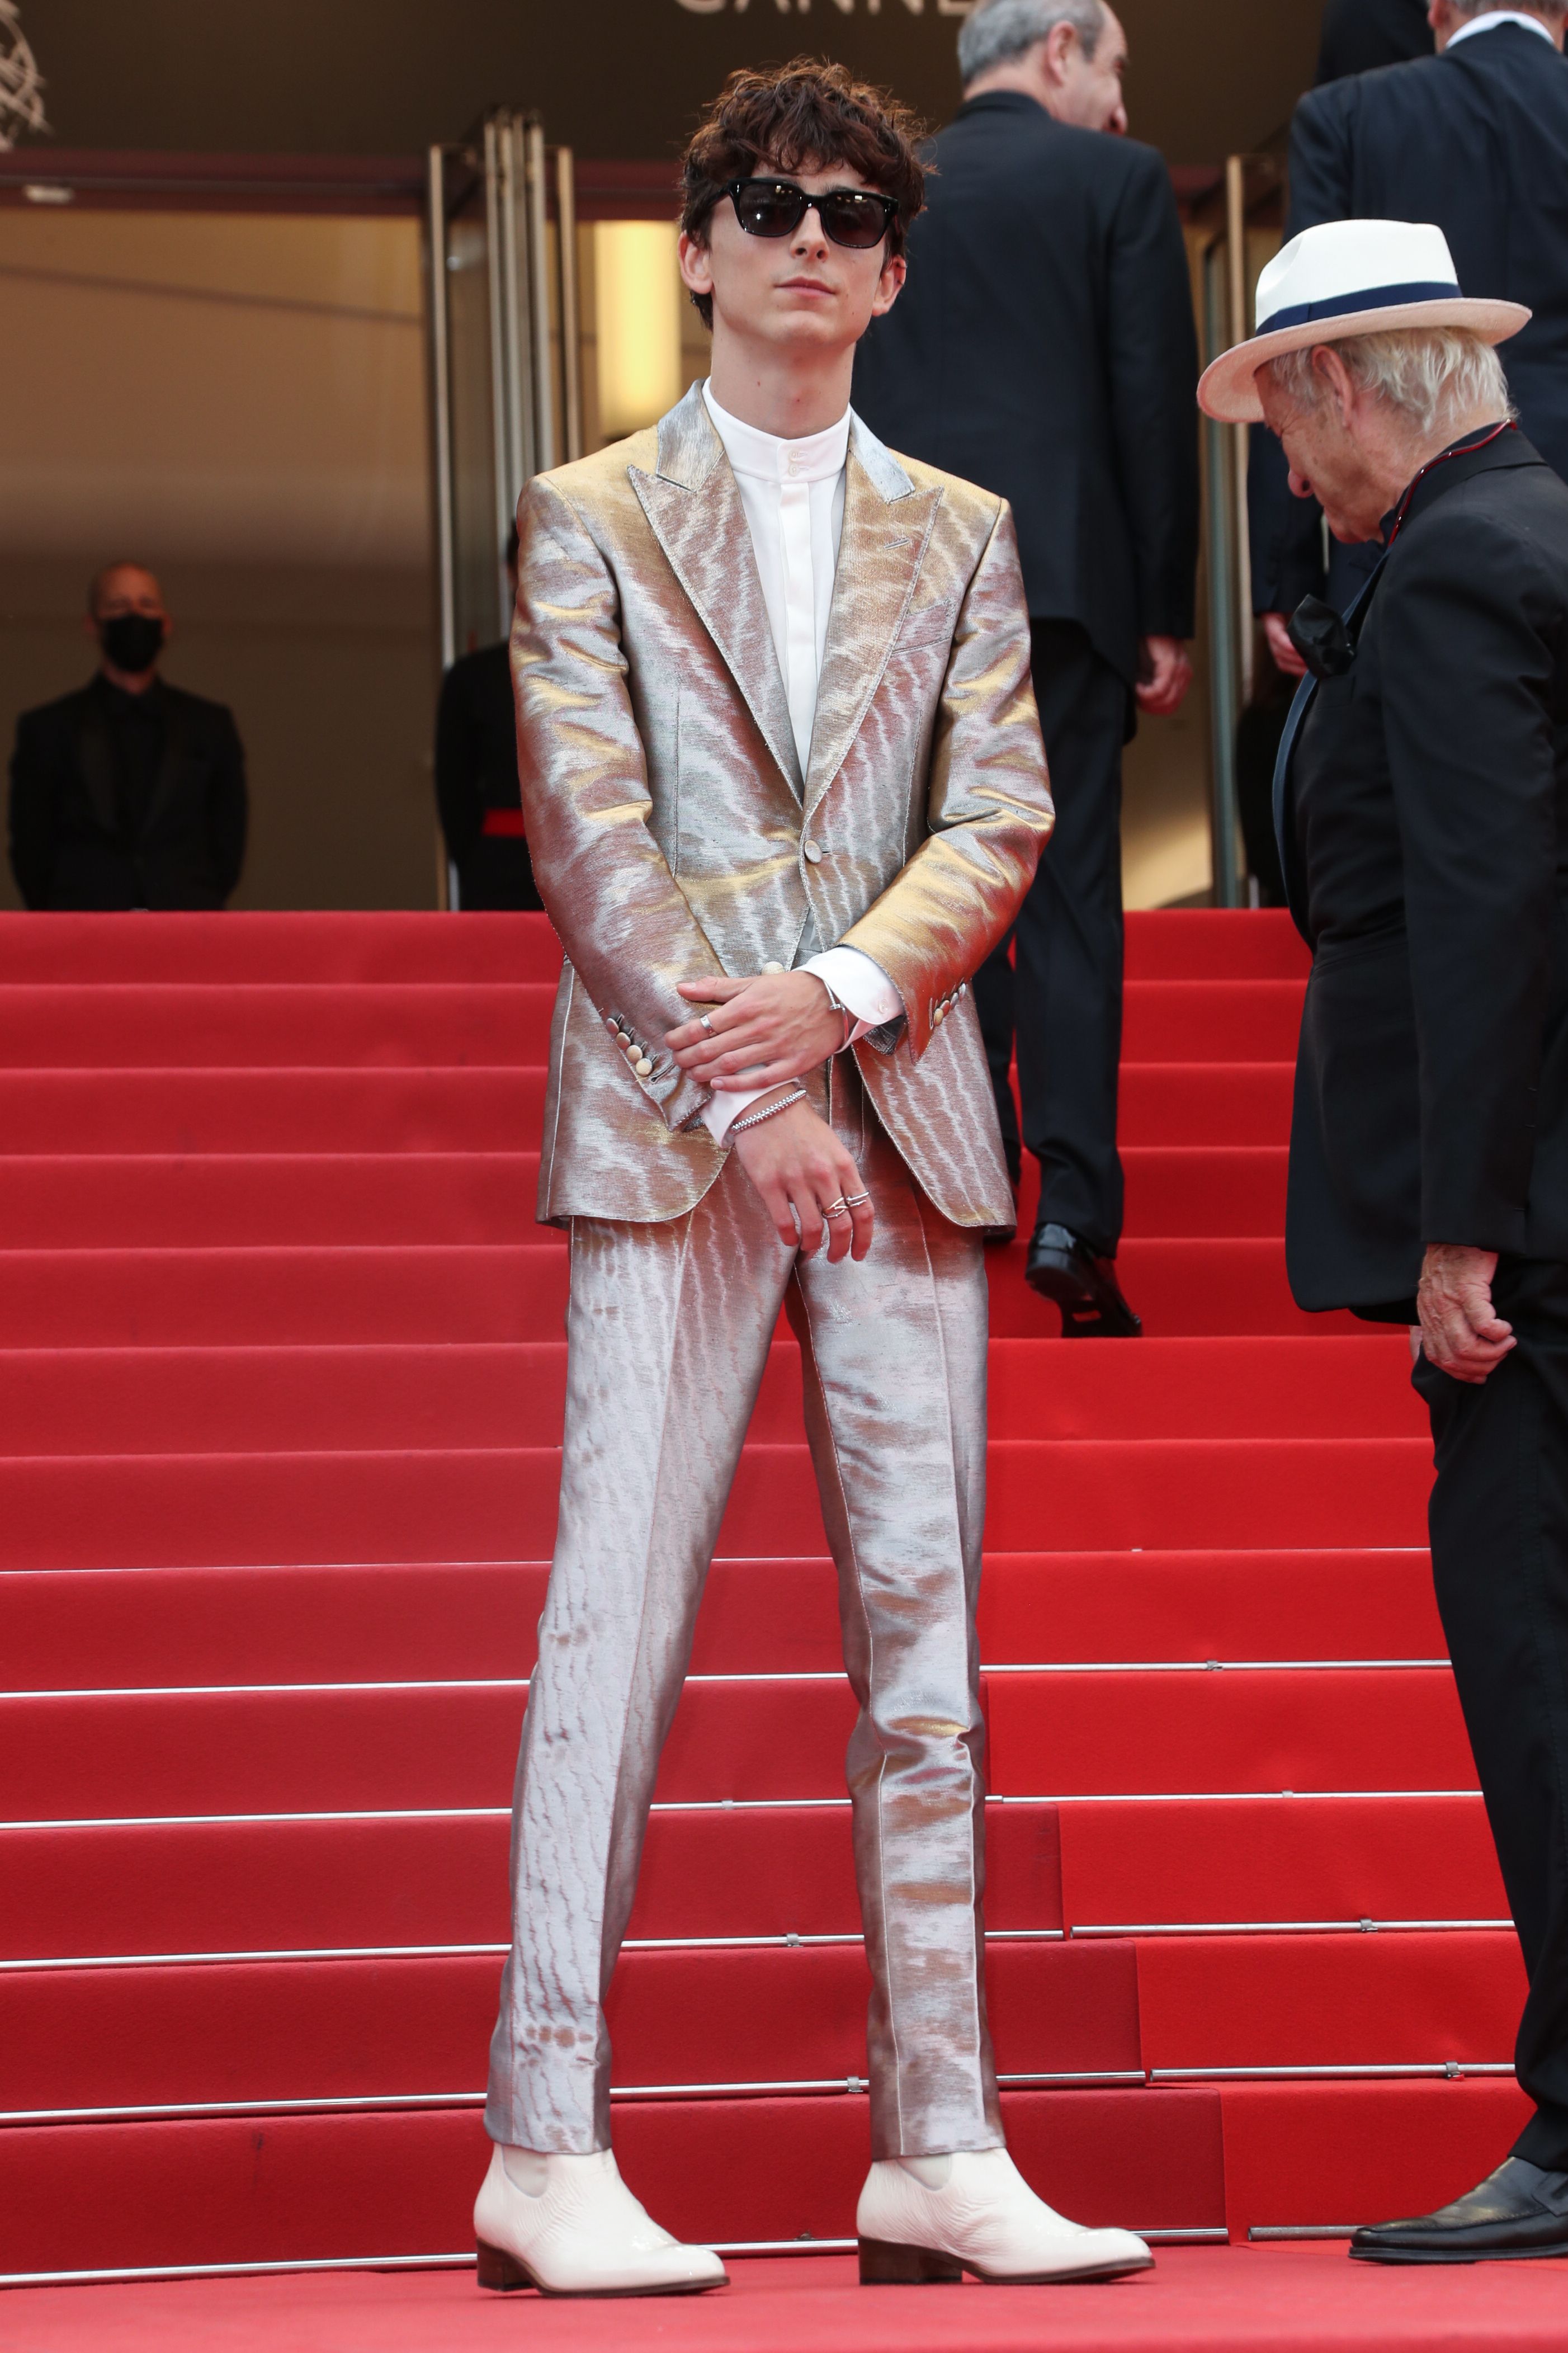 Timothee Chalamet Red Carpet Photos: Actor's Hottest Moments